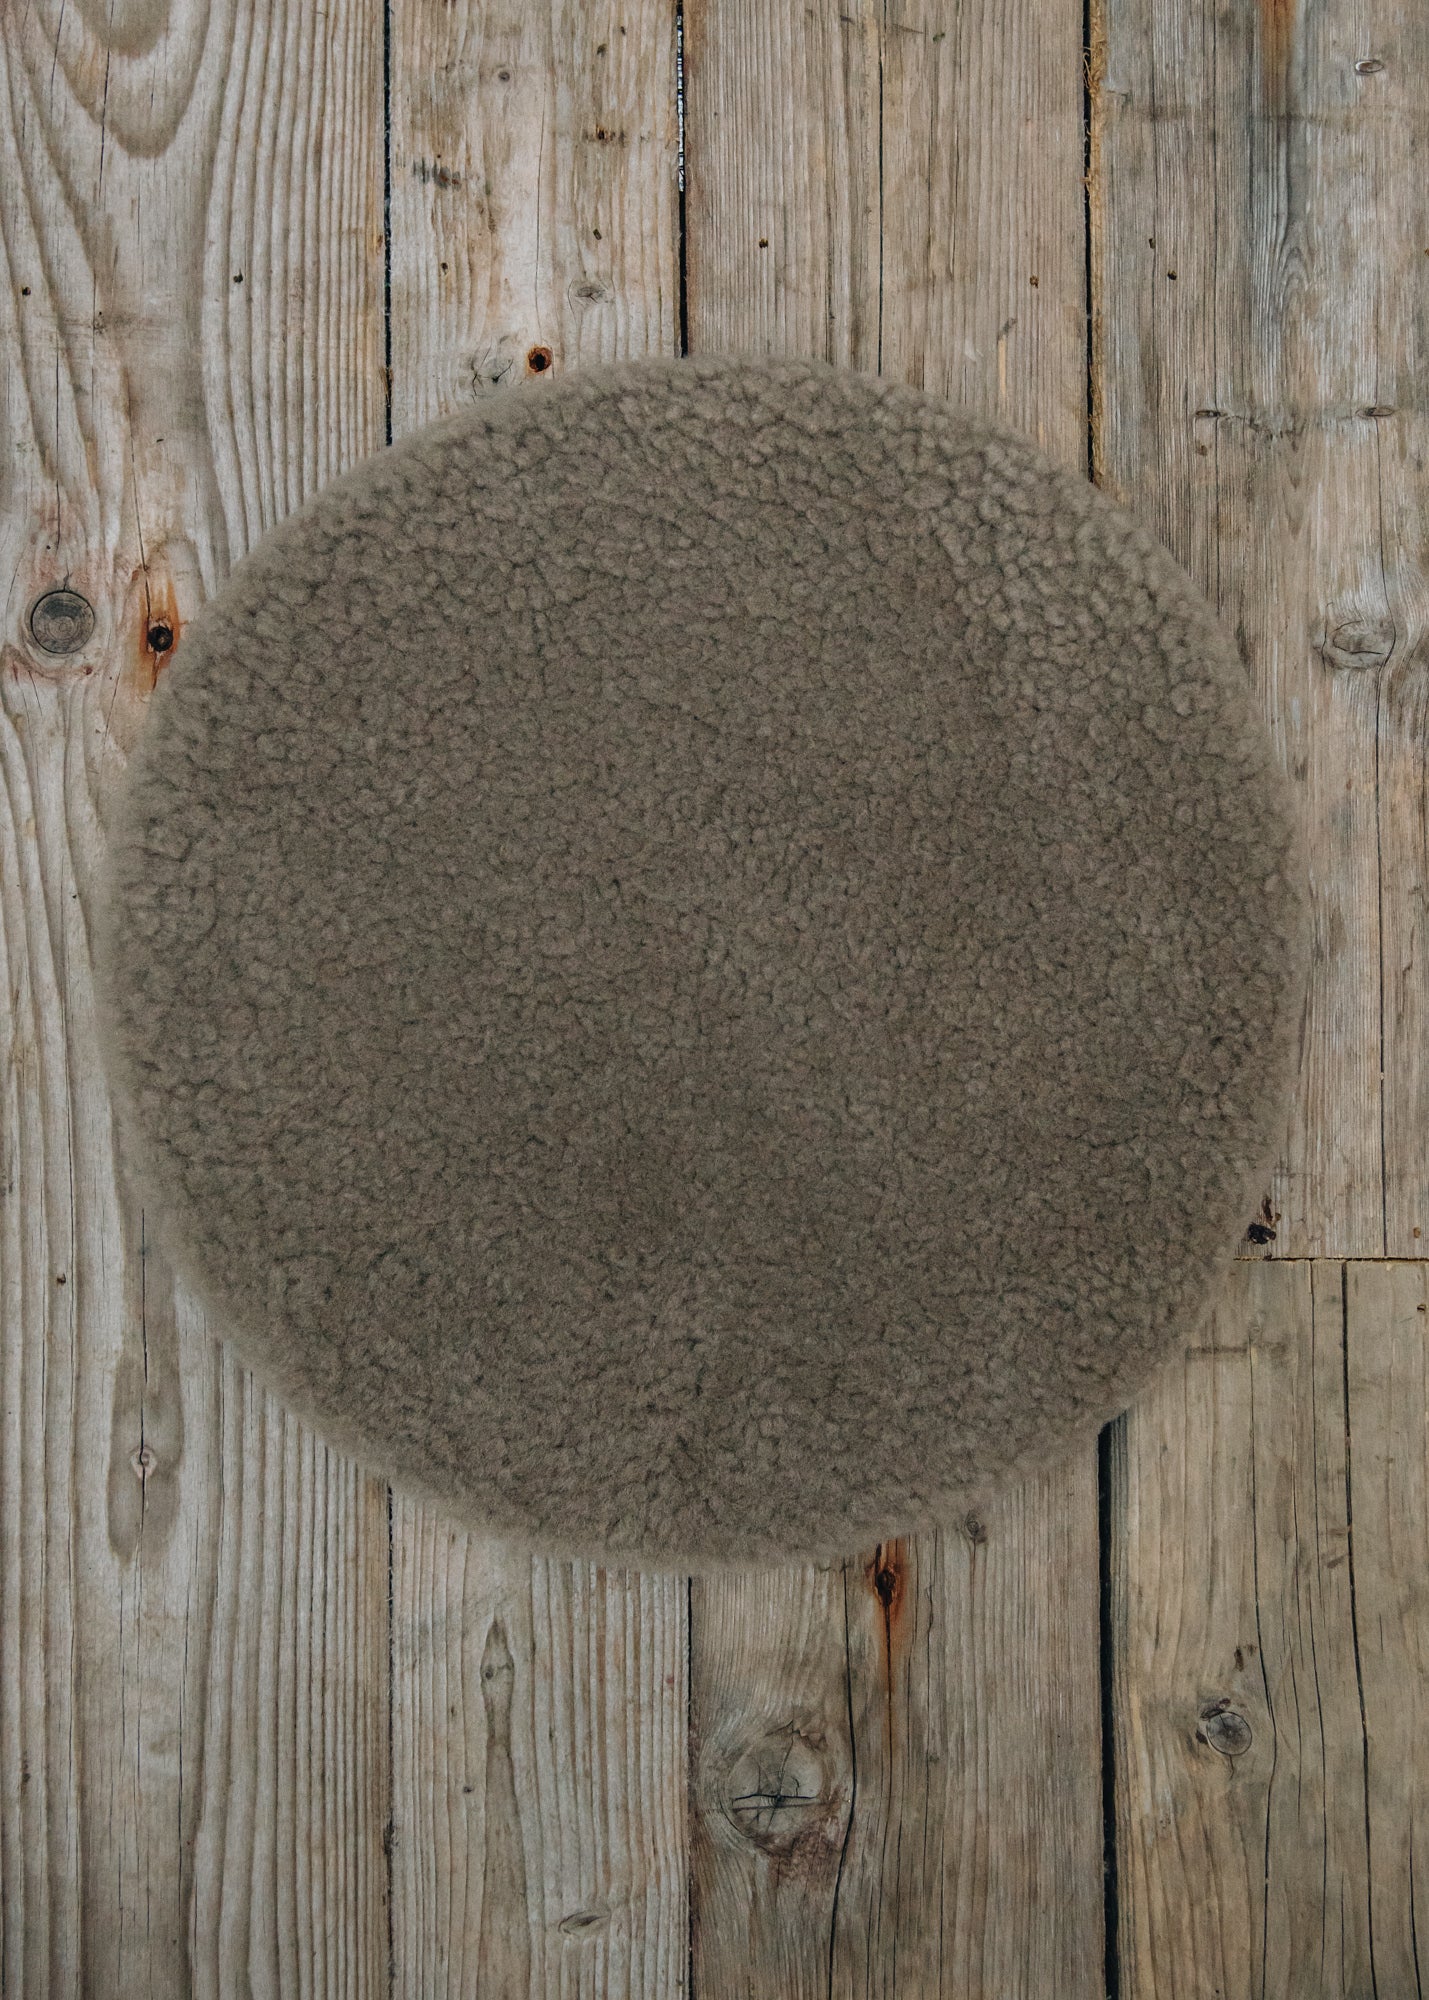 Shepherd of Sweden Round Seat Cushion in Cappuccino